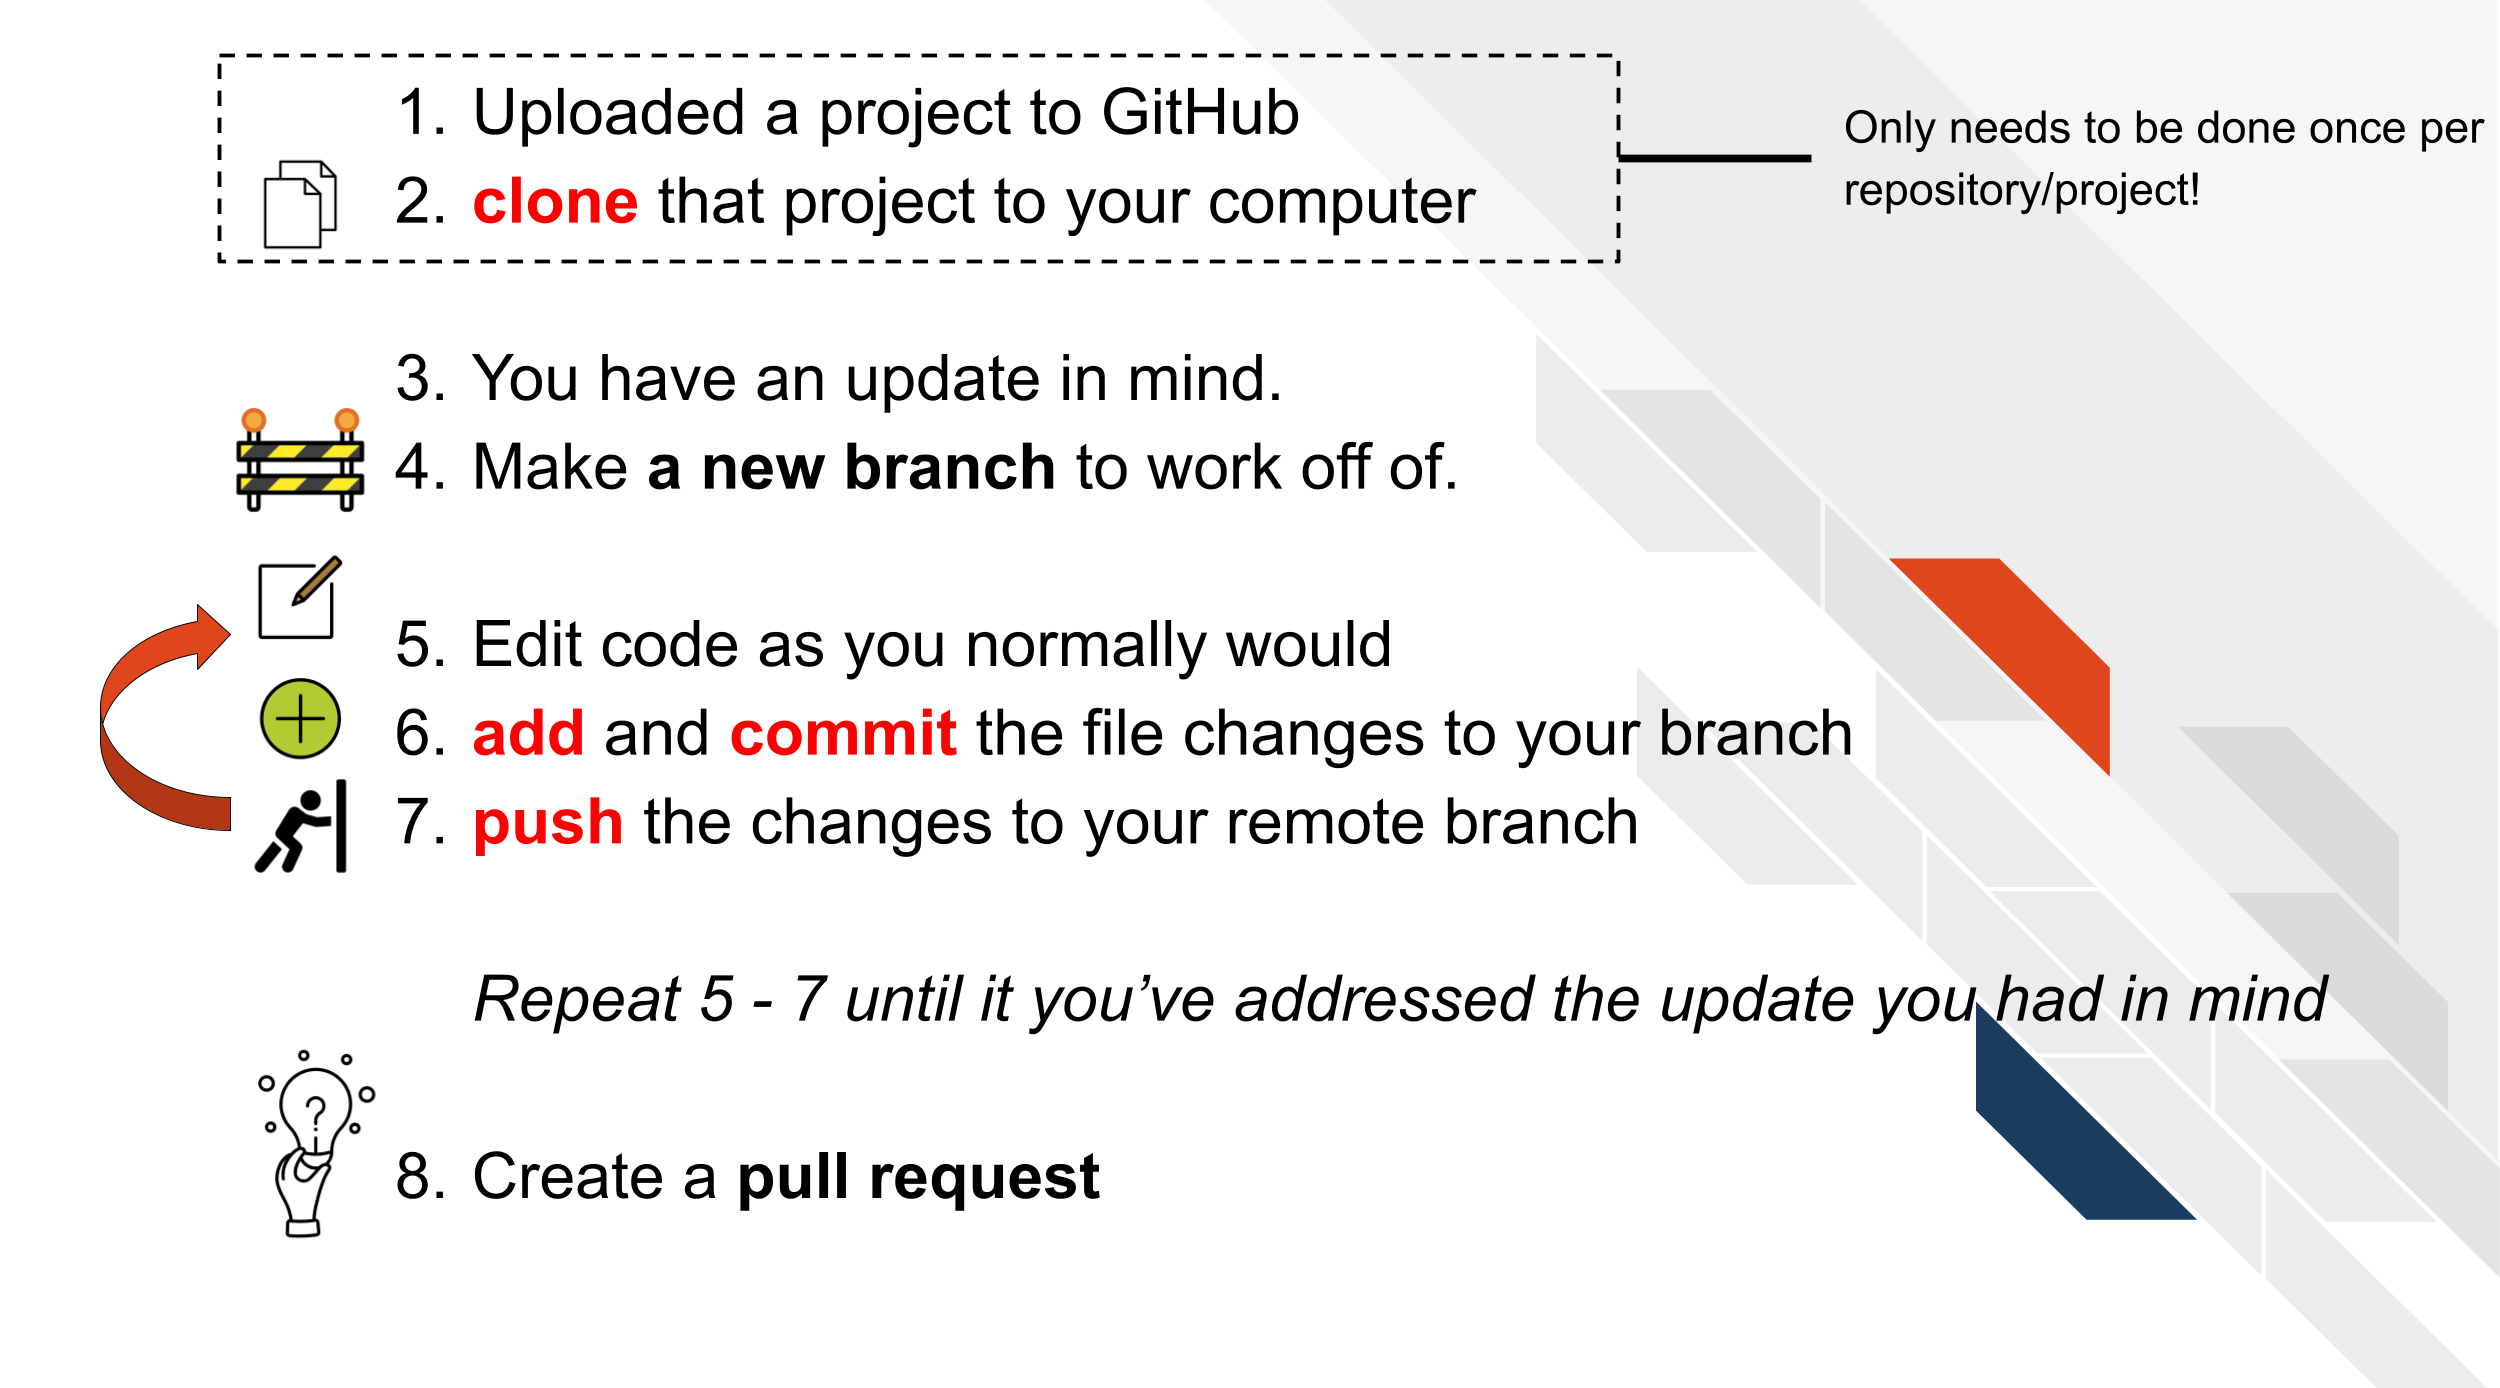 An overview of the GitHub workflow. Uploaded a project to GitHub. Clone that project to your computer. You will only have to do this cloning and set up step once per repository/project. Now let’s say you have an update in mind. Make a new branch to work off of. Edit code as you normally would. Add and commit the file changes to your branch. Push the changes to your remote branch. Repeat these steps until it you’ve addressed the update you had in mind Now, Create a pull request.